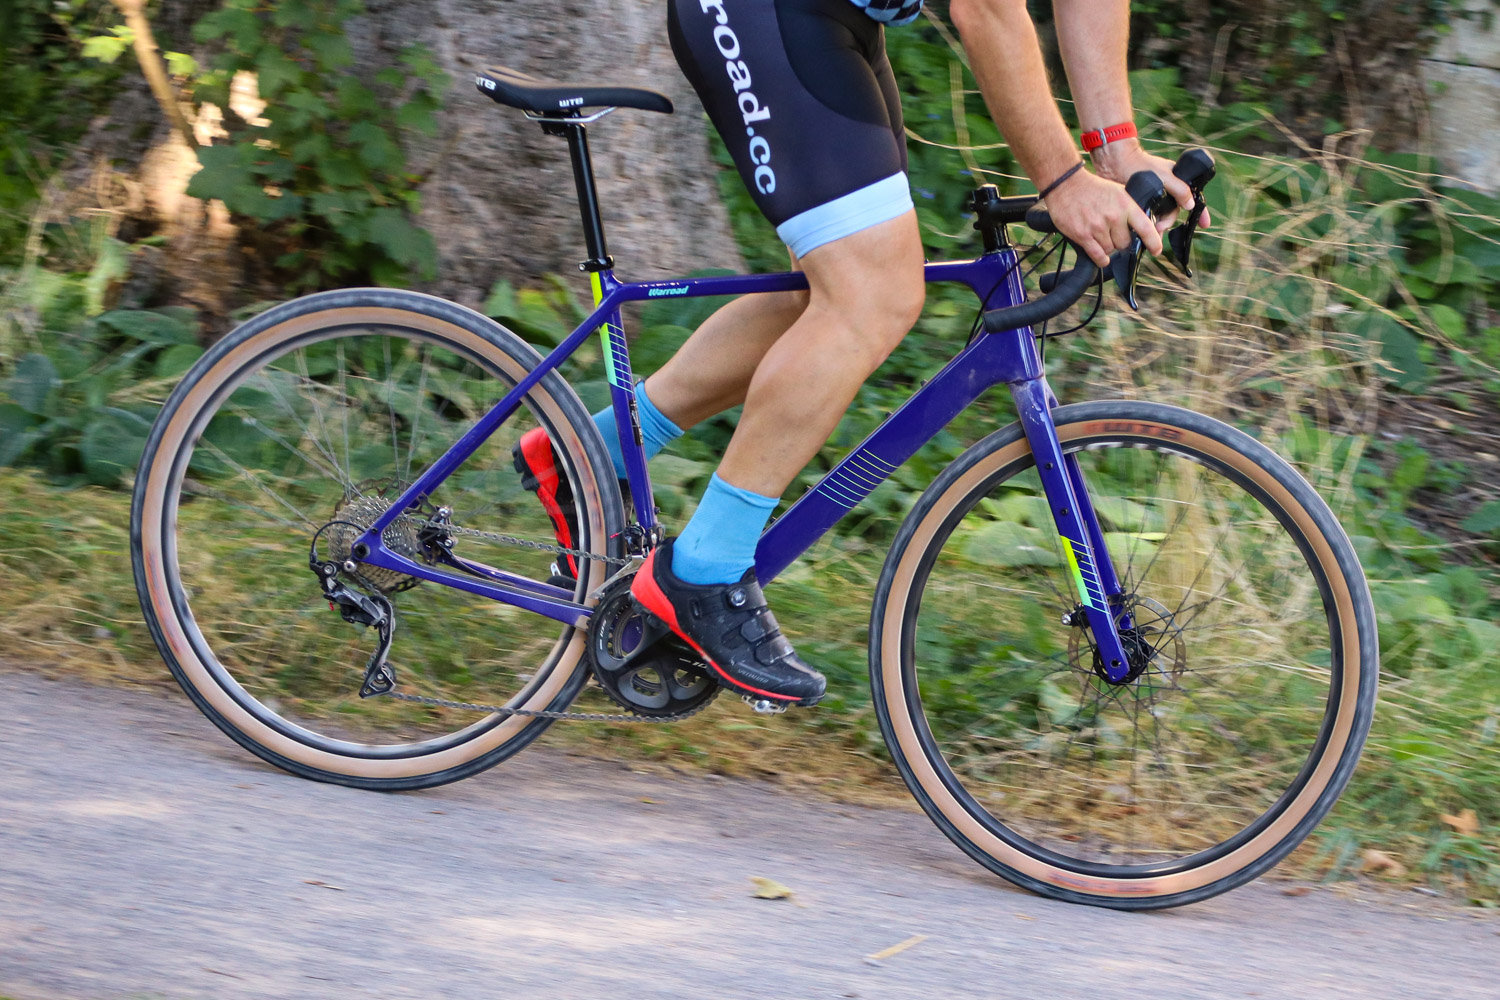 good looking carbon endurance bike with 